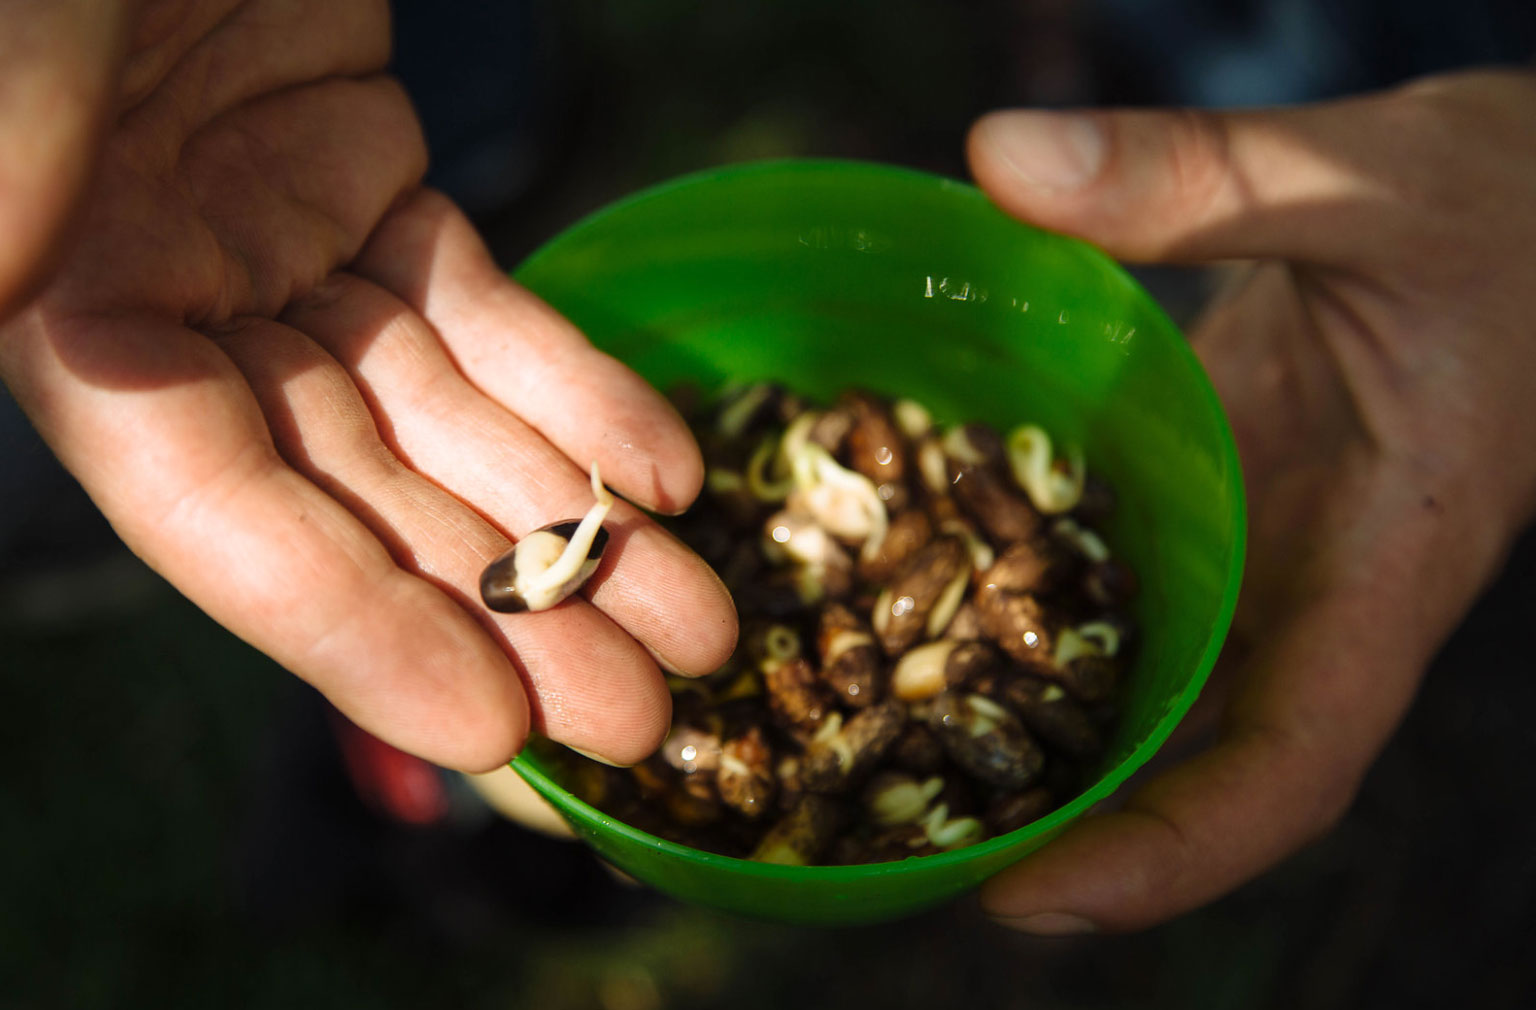 Hands holding germinating beans